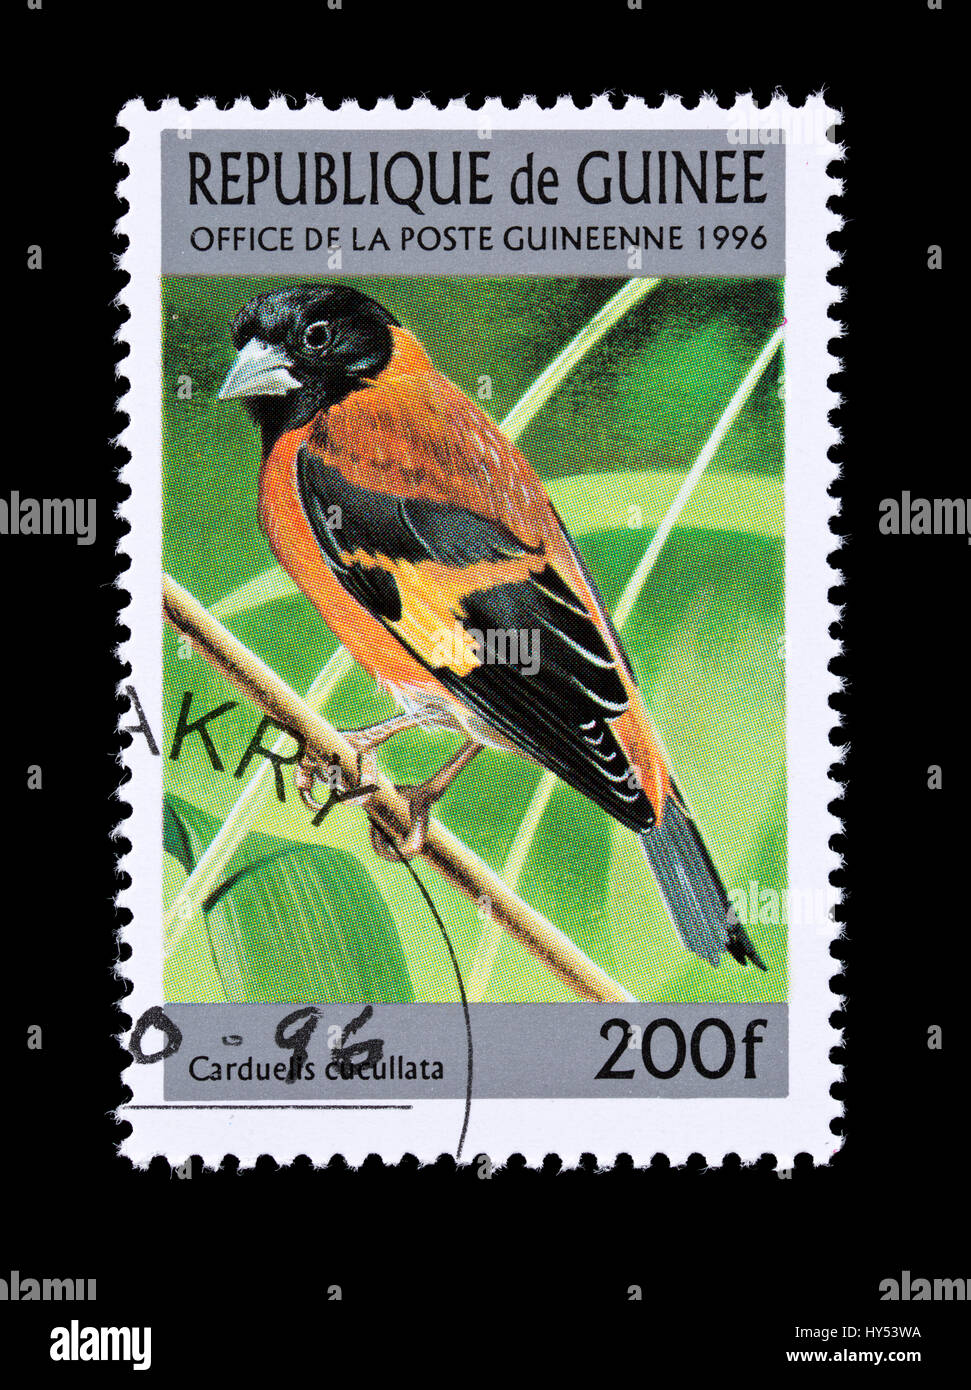 Postage stamp from Guinea depicting common red siskin (Carduelis cucullata) Stock Photo